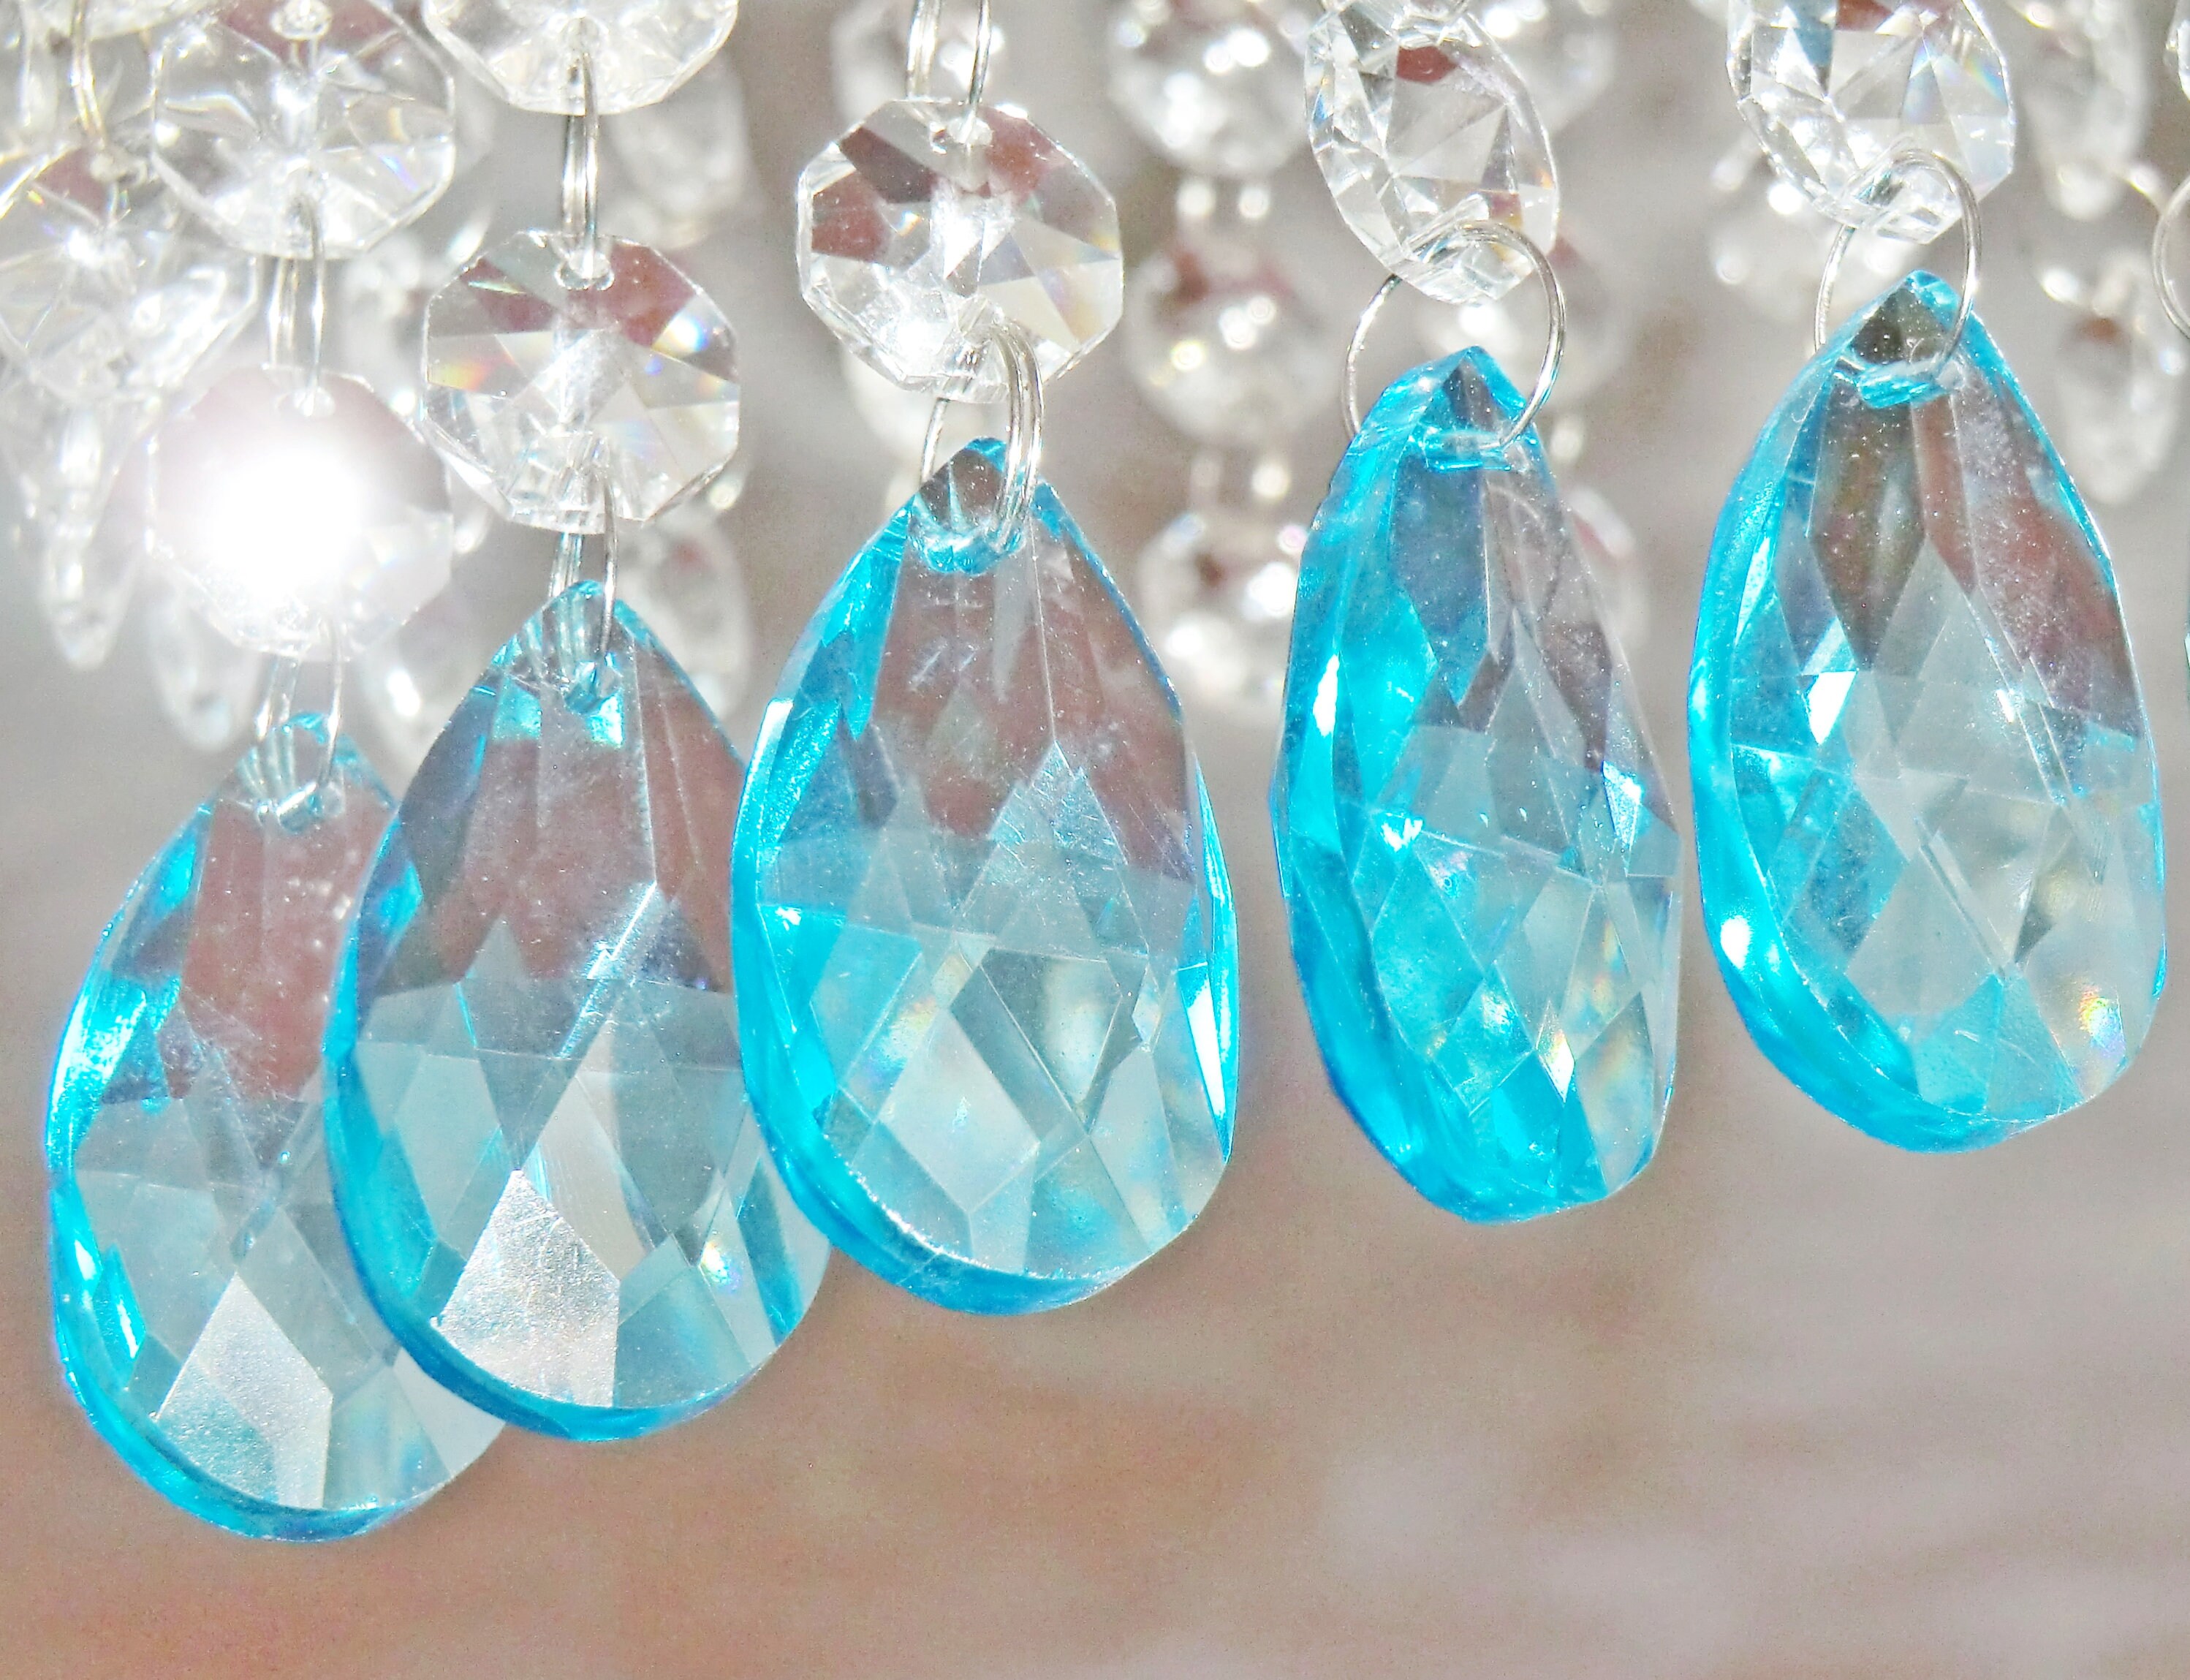 Aqua Light Teal Chandelier Drops Glass Crystals Droplets Oval Beads Vintage Antique Deco Christmas Wishing Tree Wedding Decorations Rainbow